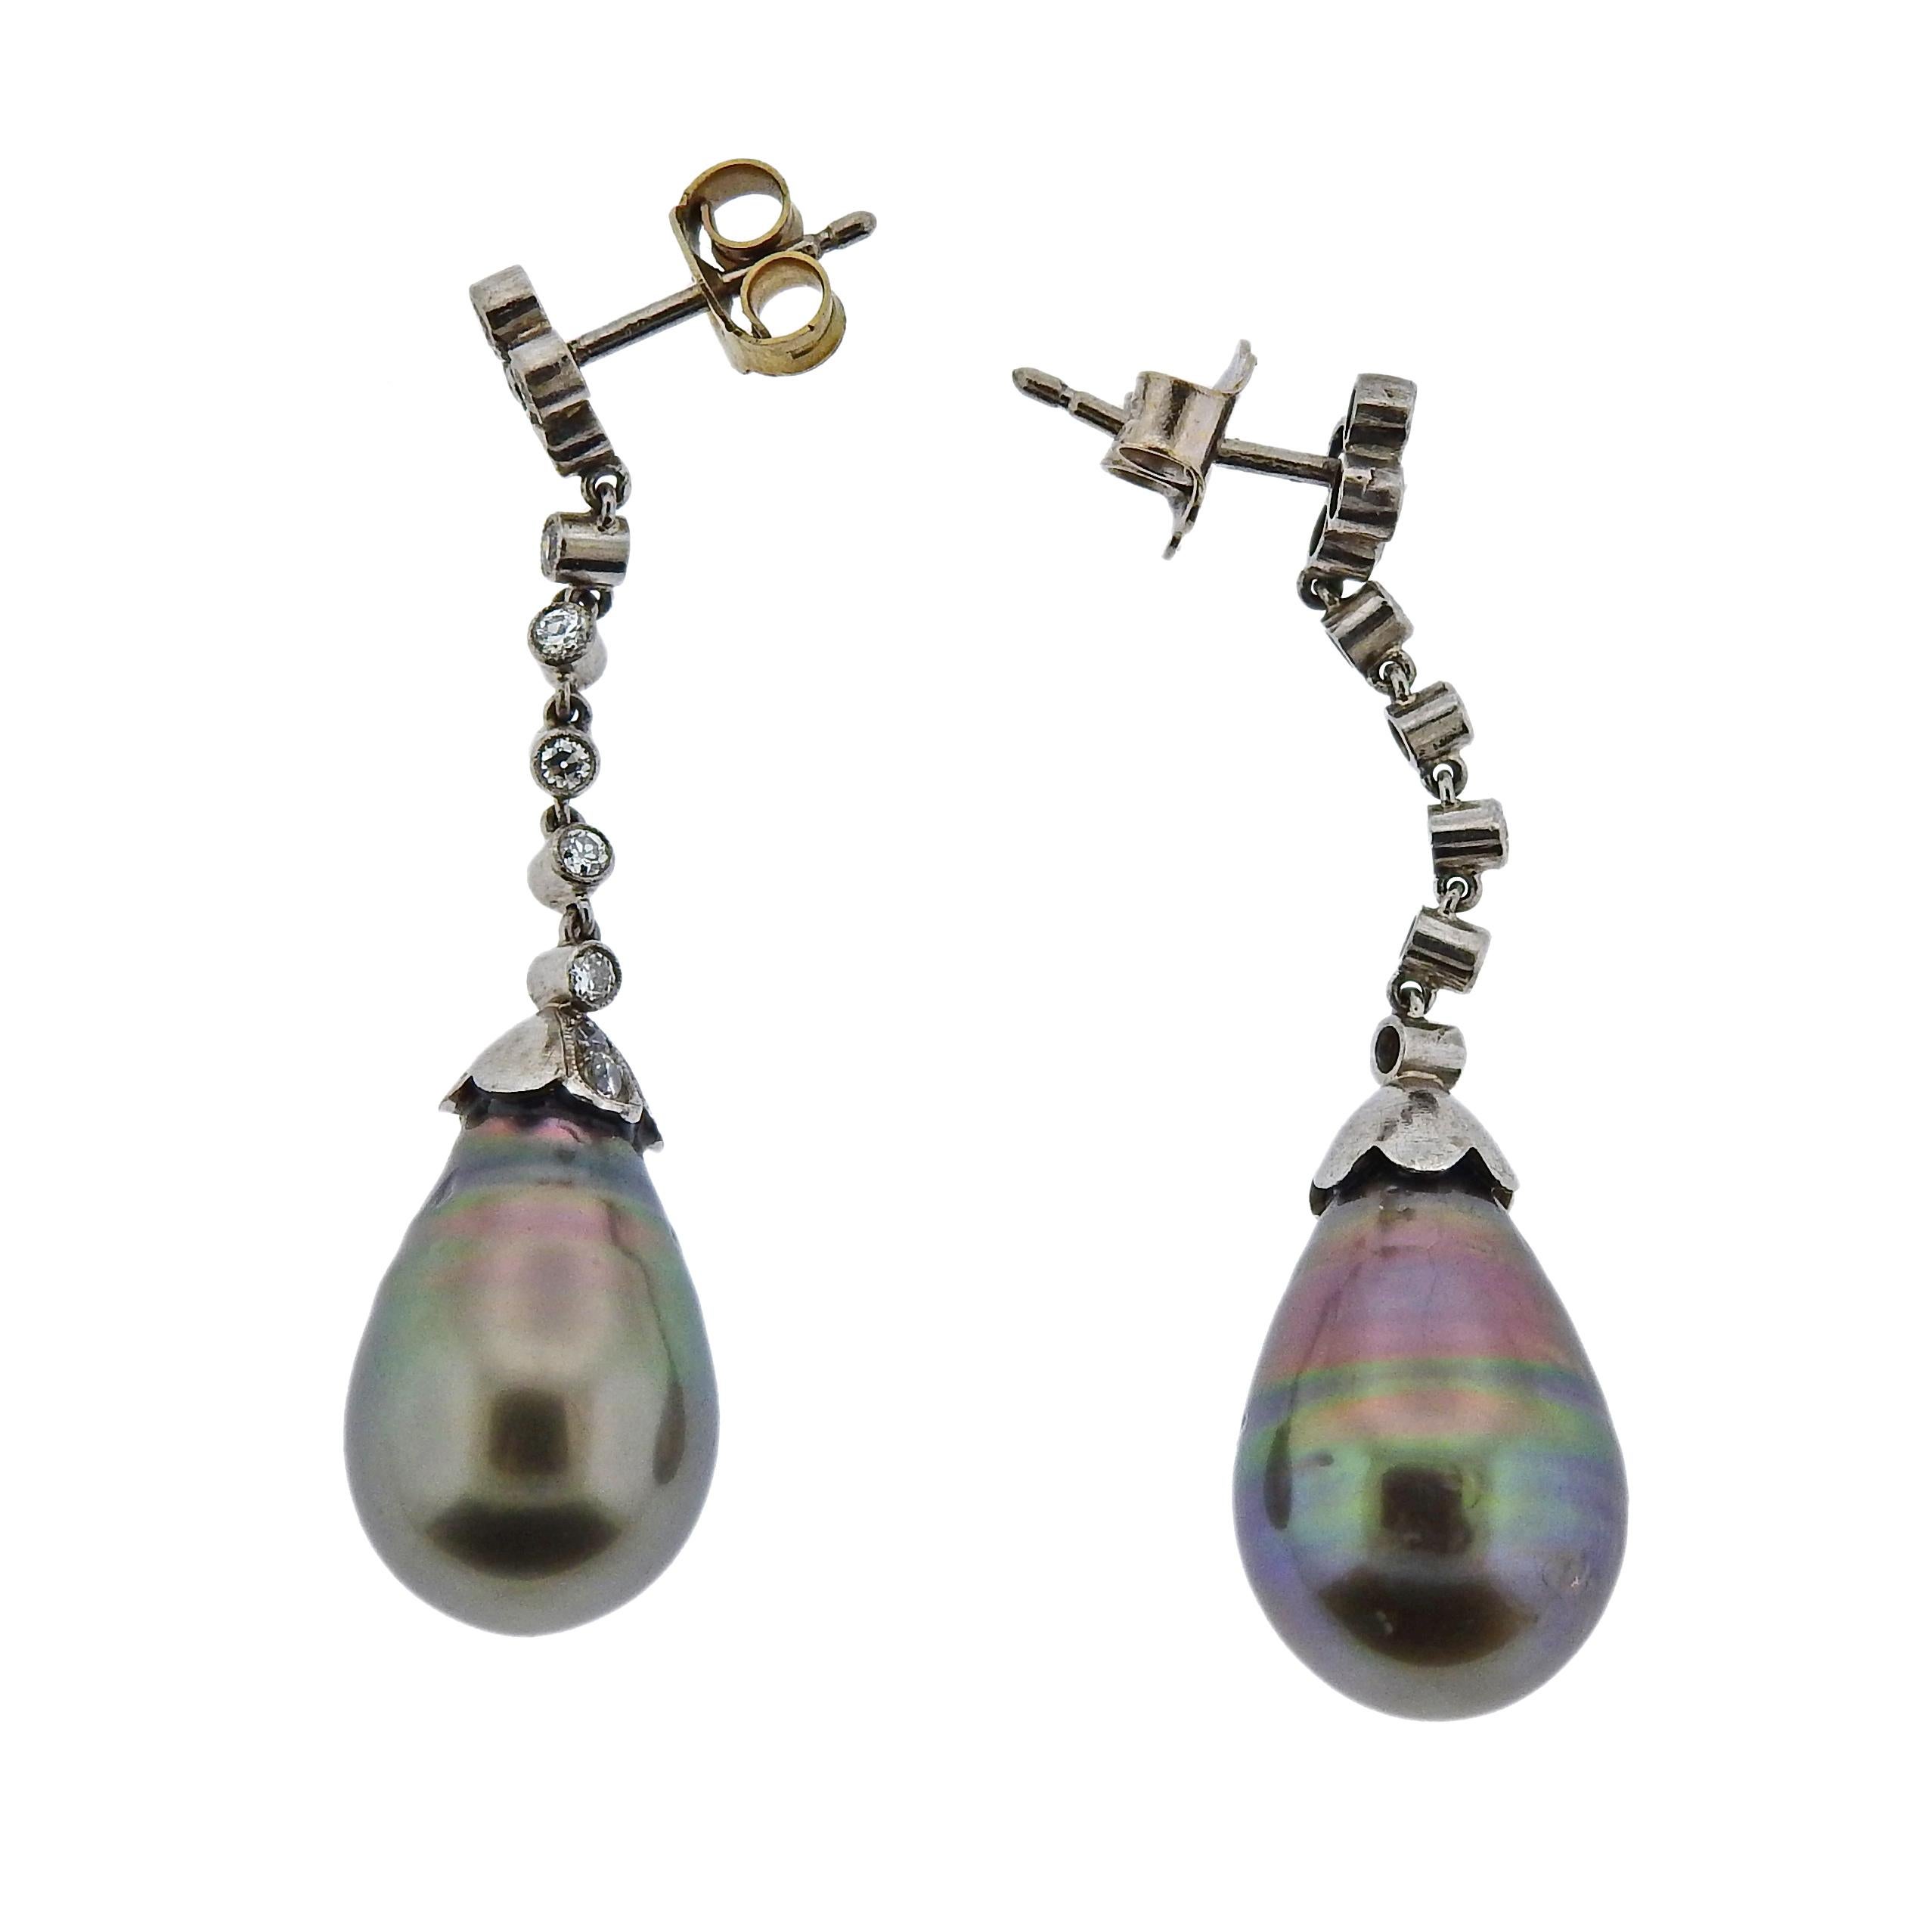 Pair of 18k gold drop earrings, featuring 11mm x 16.5mm Tahitian pearls and approx. 0.50ctw in diamonds.  Marked 18ct on the posts. Earrings are 43mm long. Weigh 8.8 grams.

SKU#E-02742